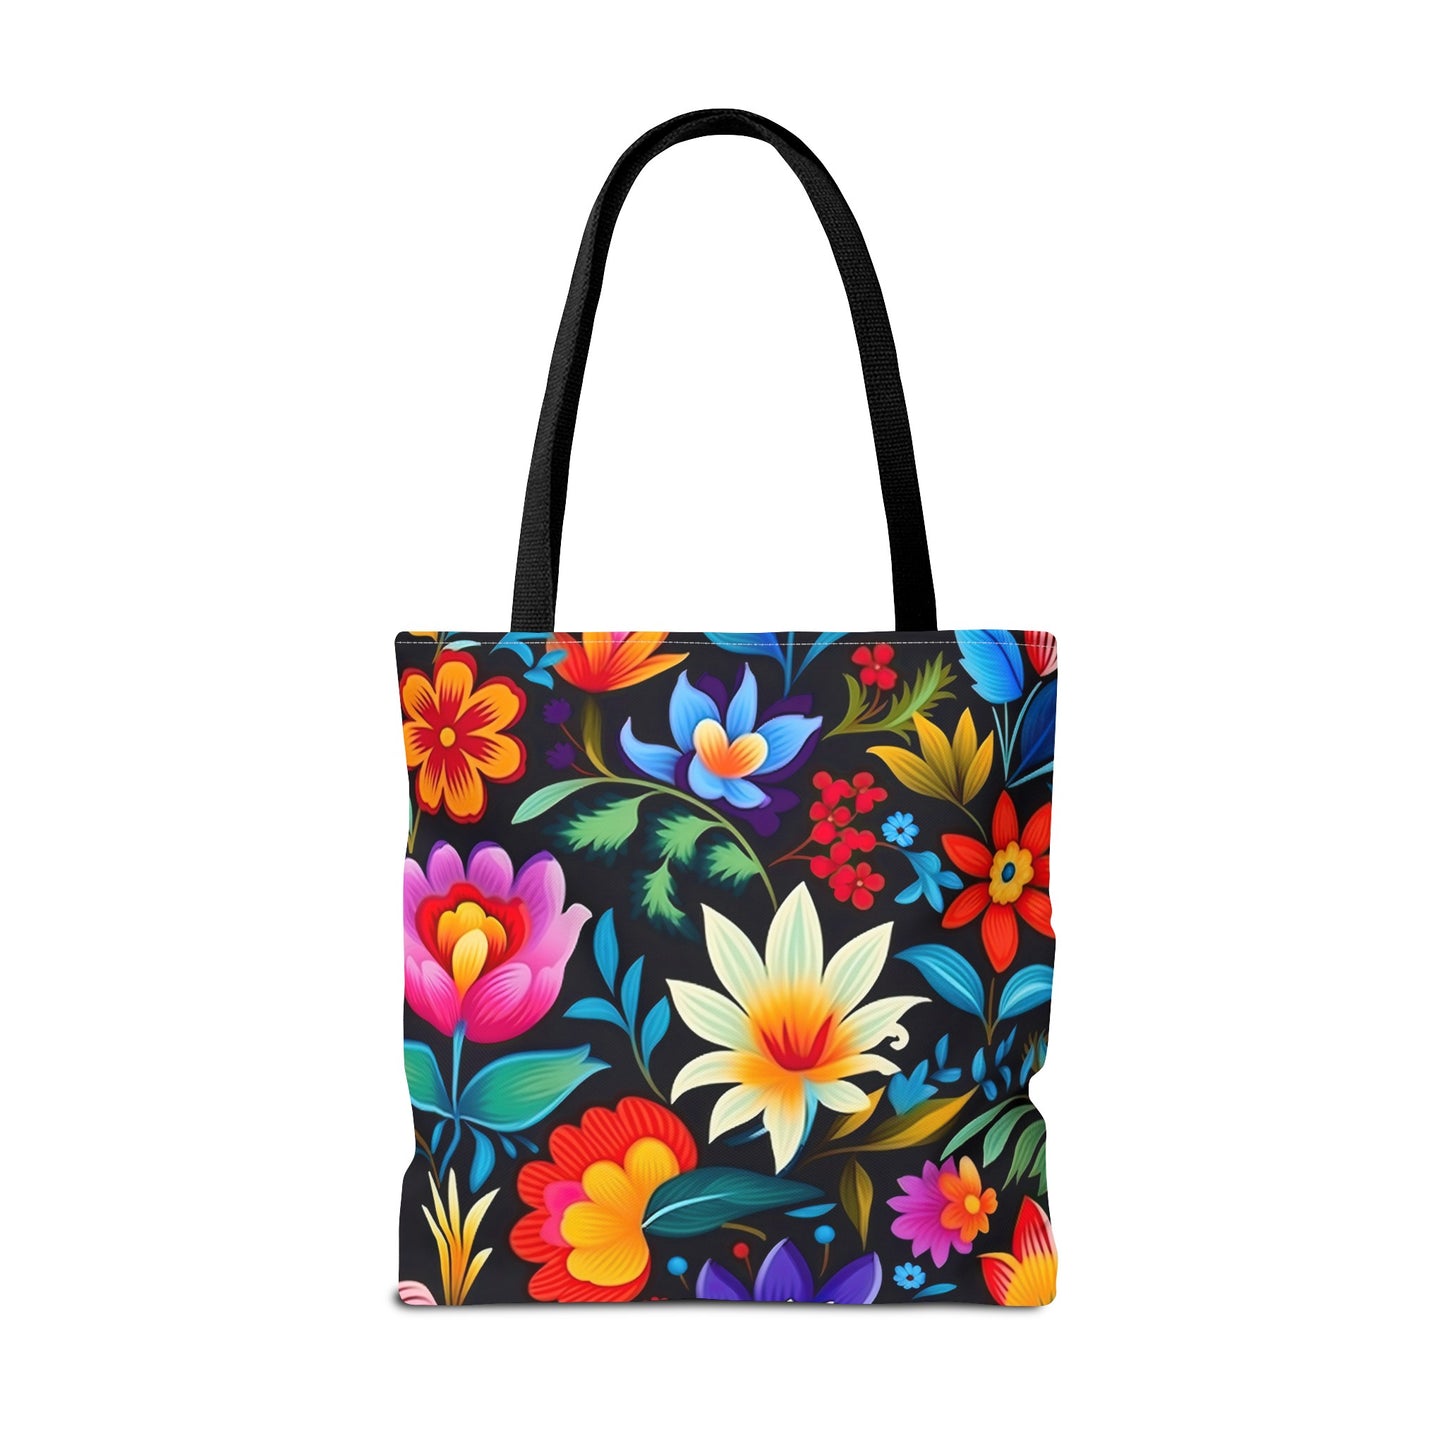 Beautiful Floral Tote Bag Available in Three Sizes